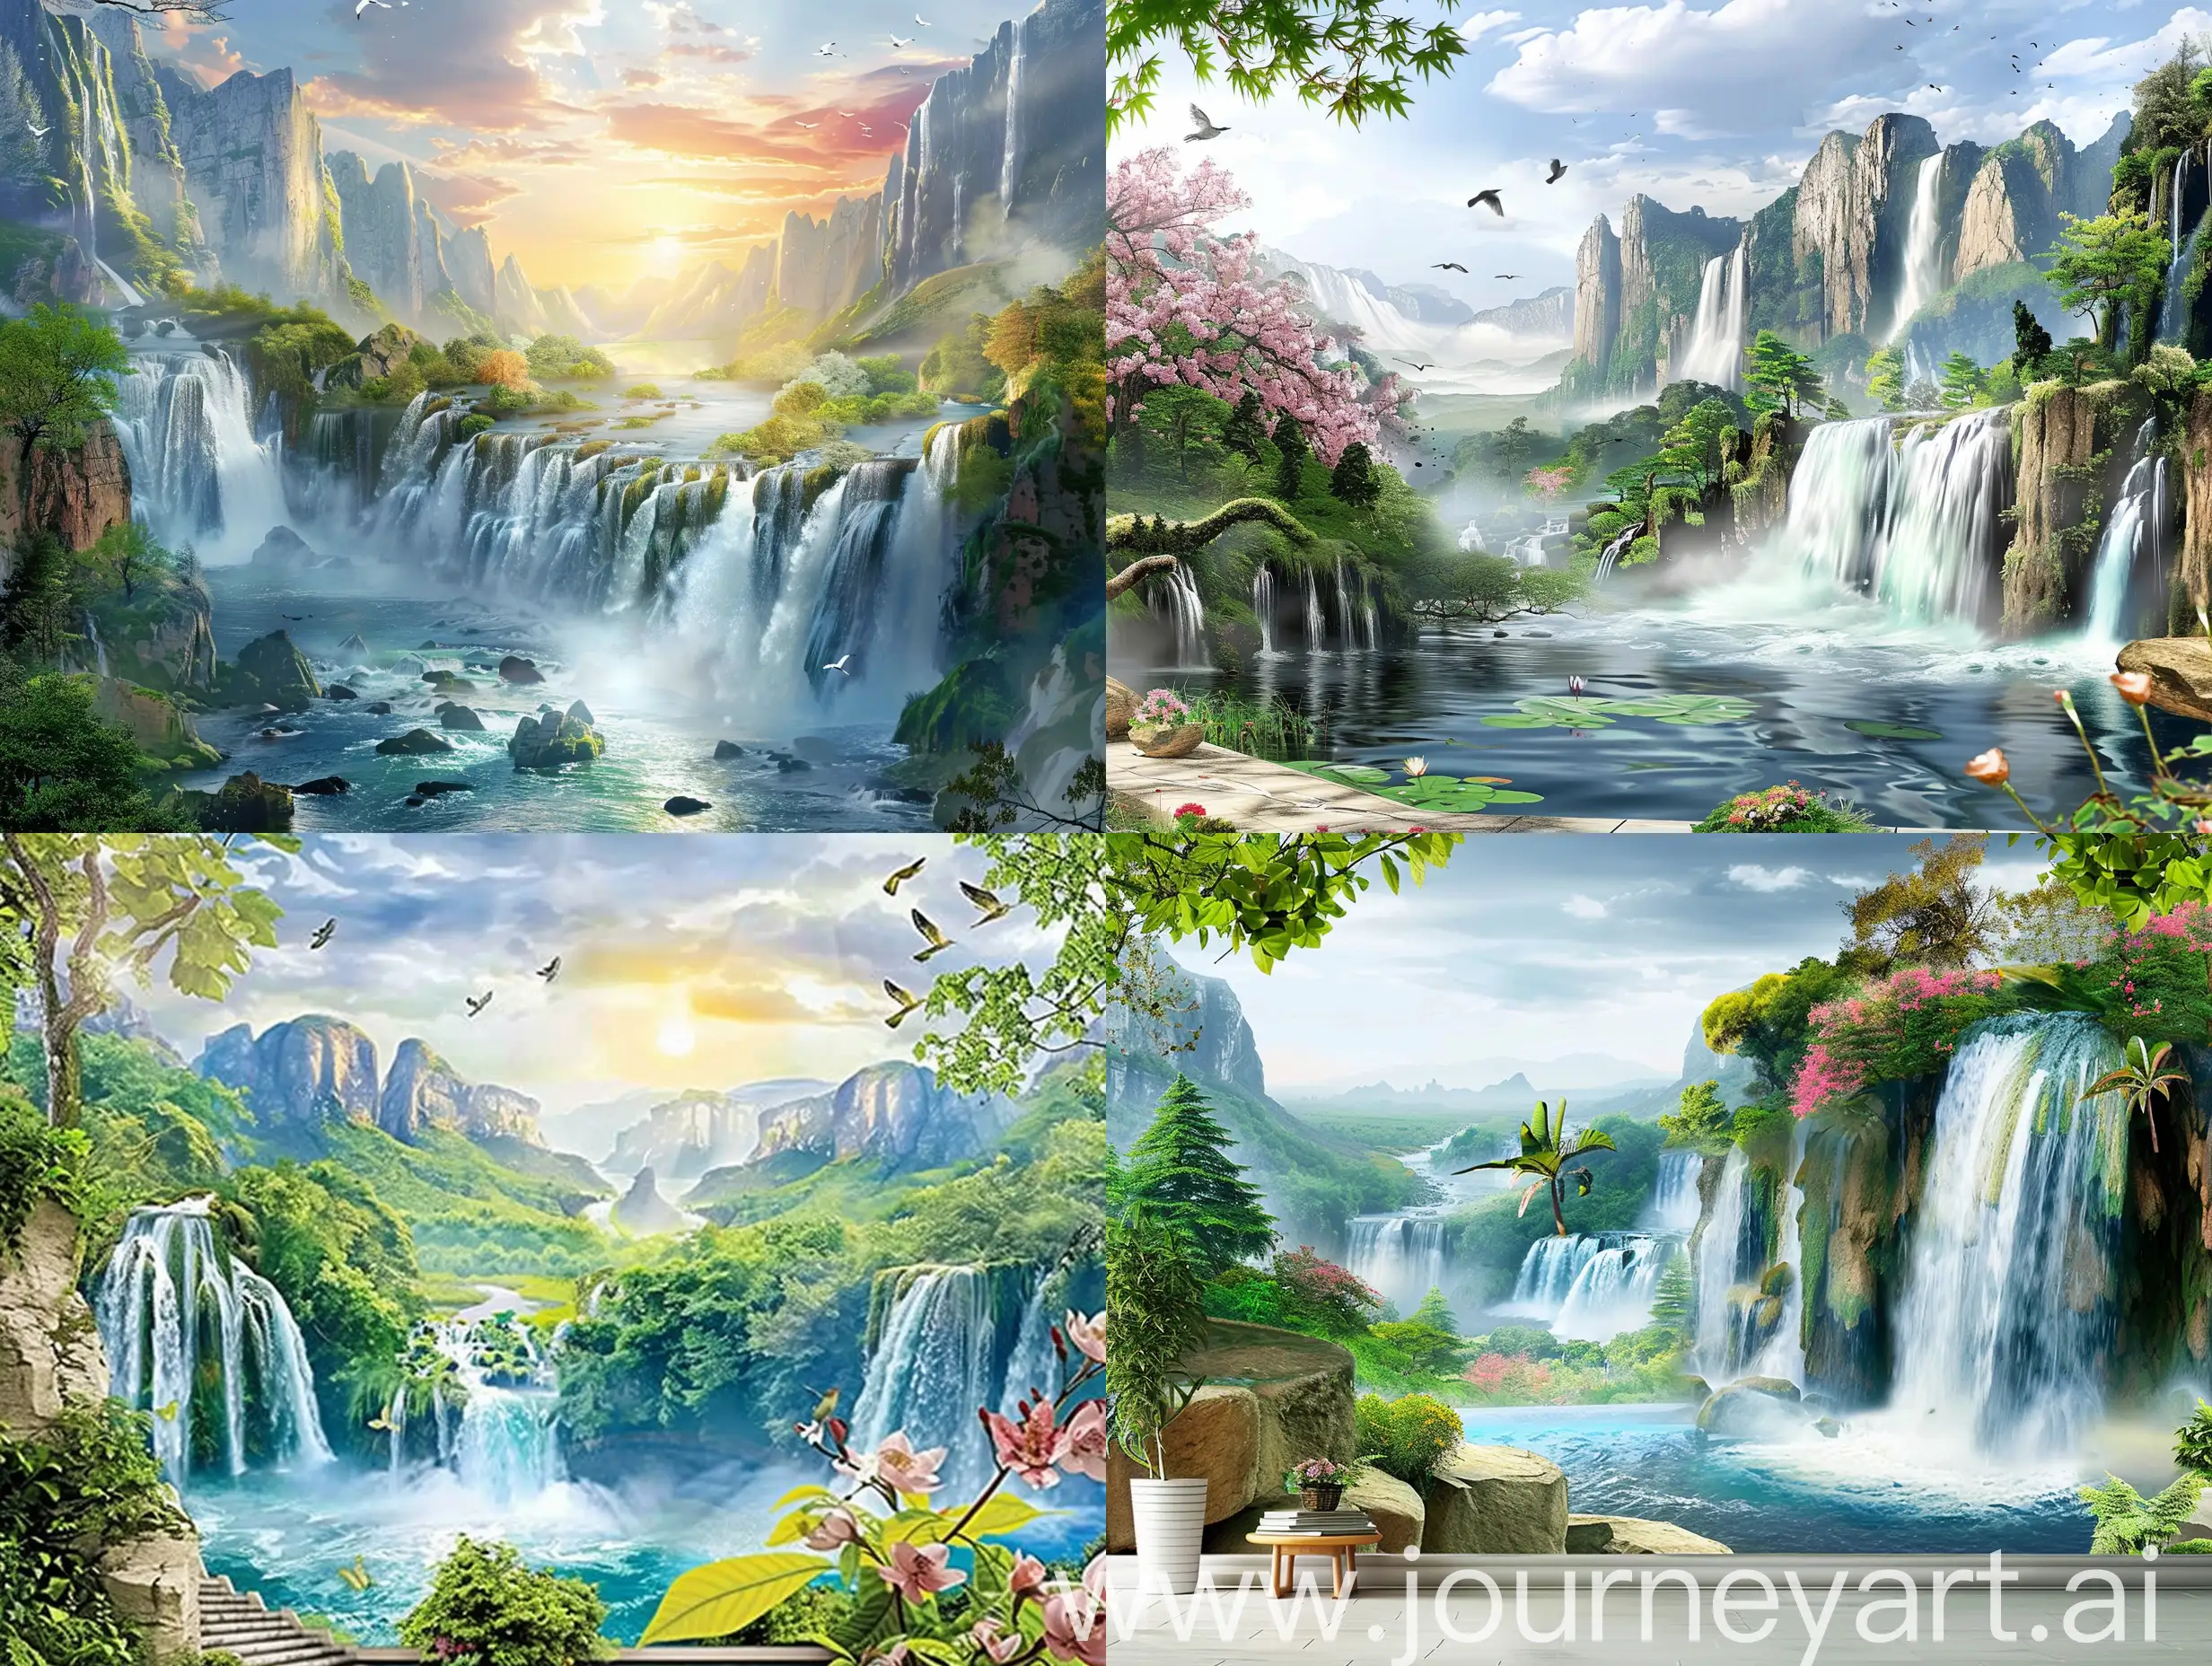 Vibrant-3D-Mural-Majestic-Waterfall-Amidst-Lush-Nature-HighQuality-Realistic-Landscape-Art